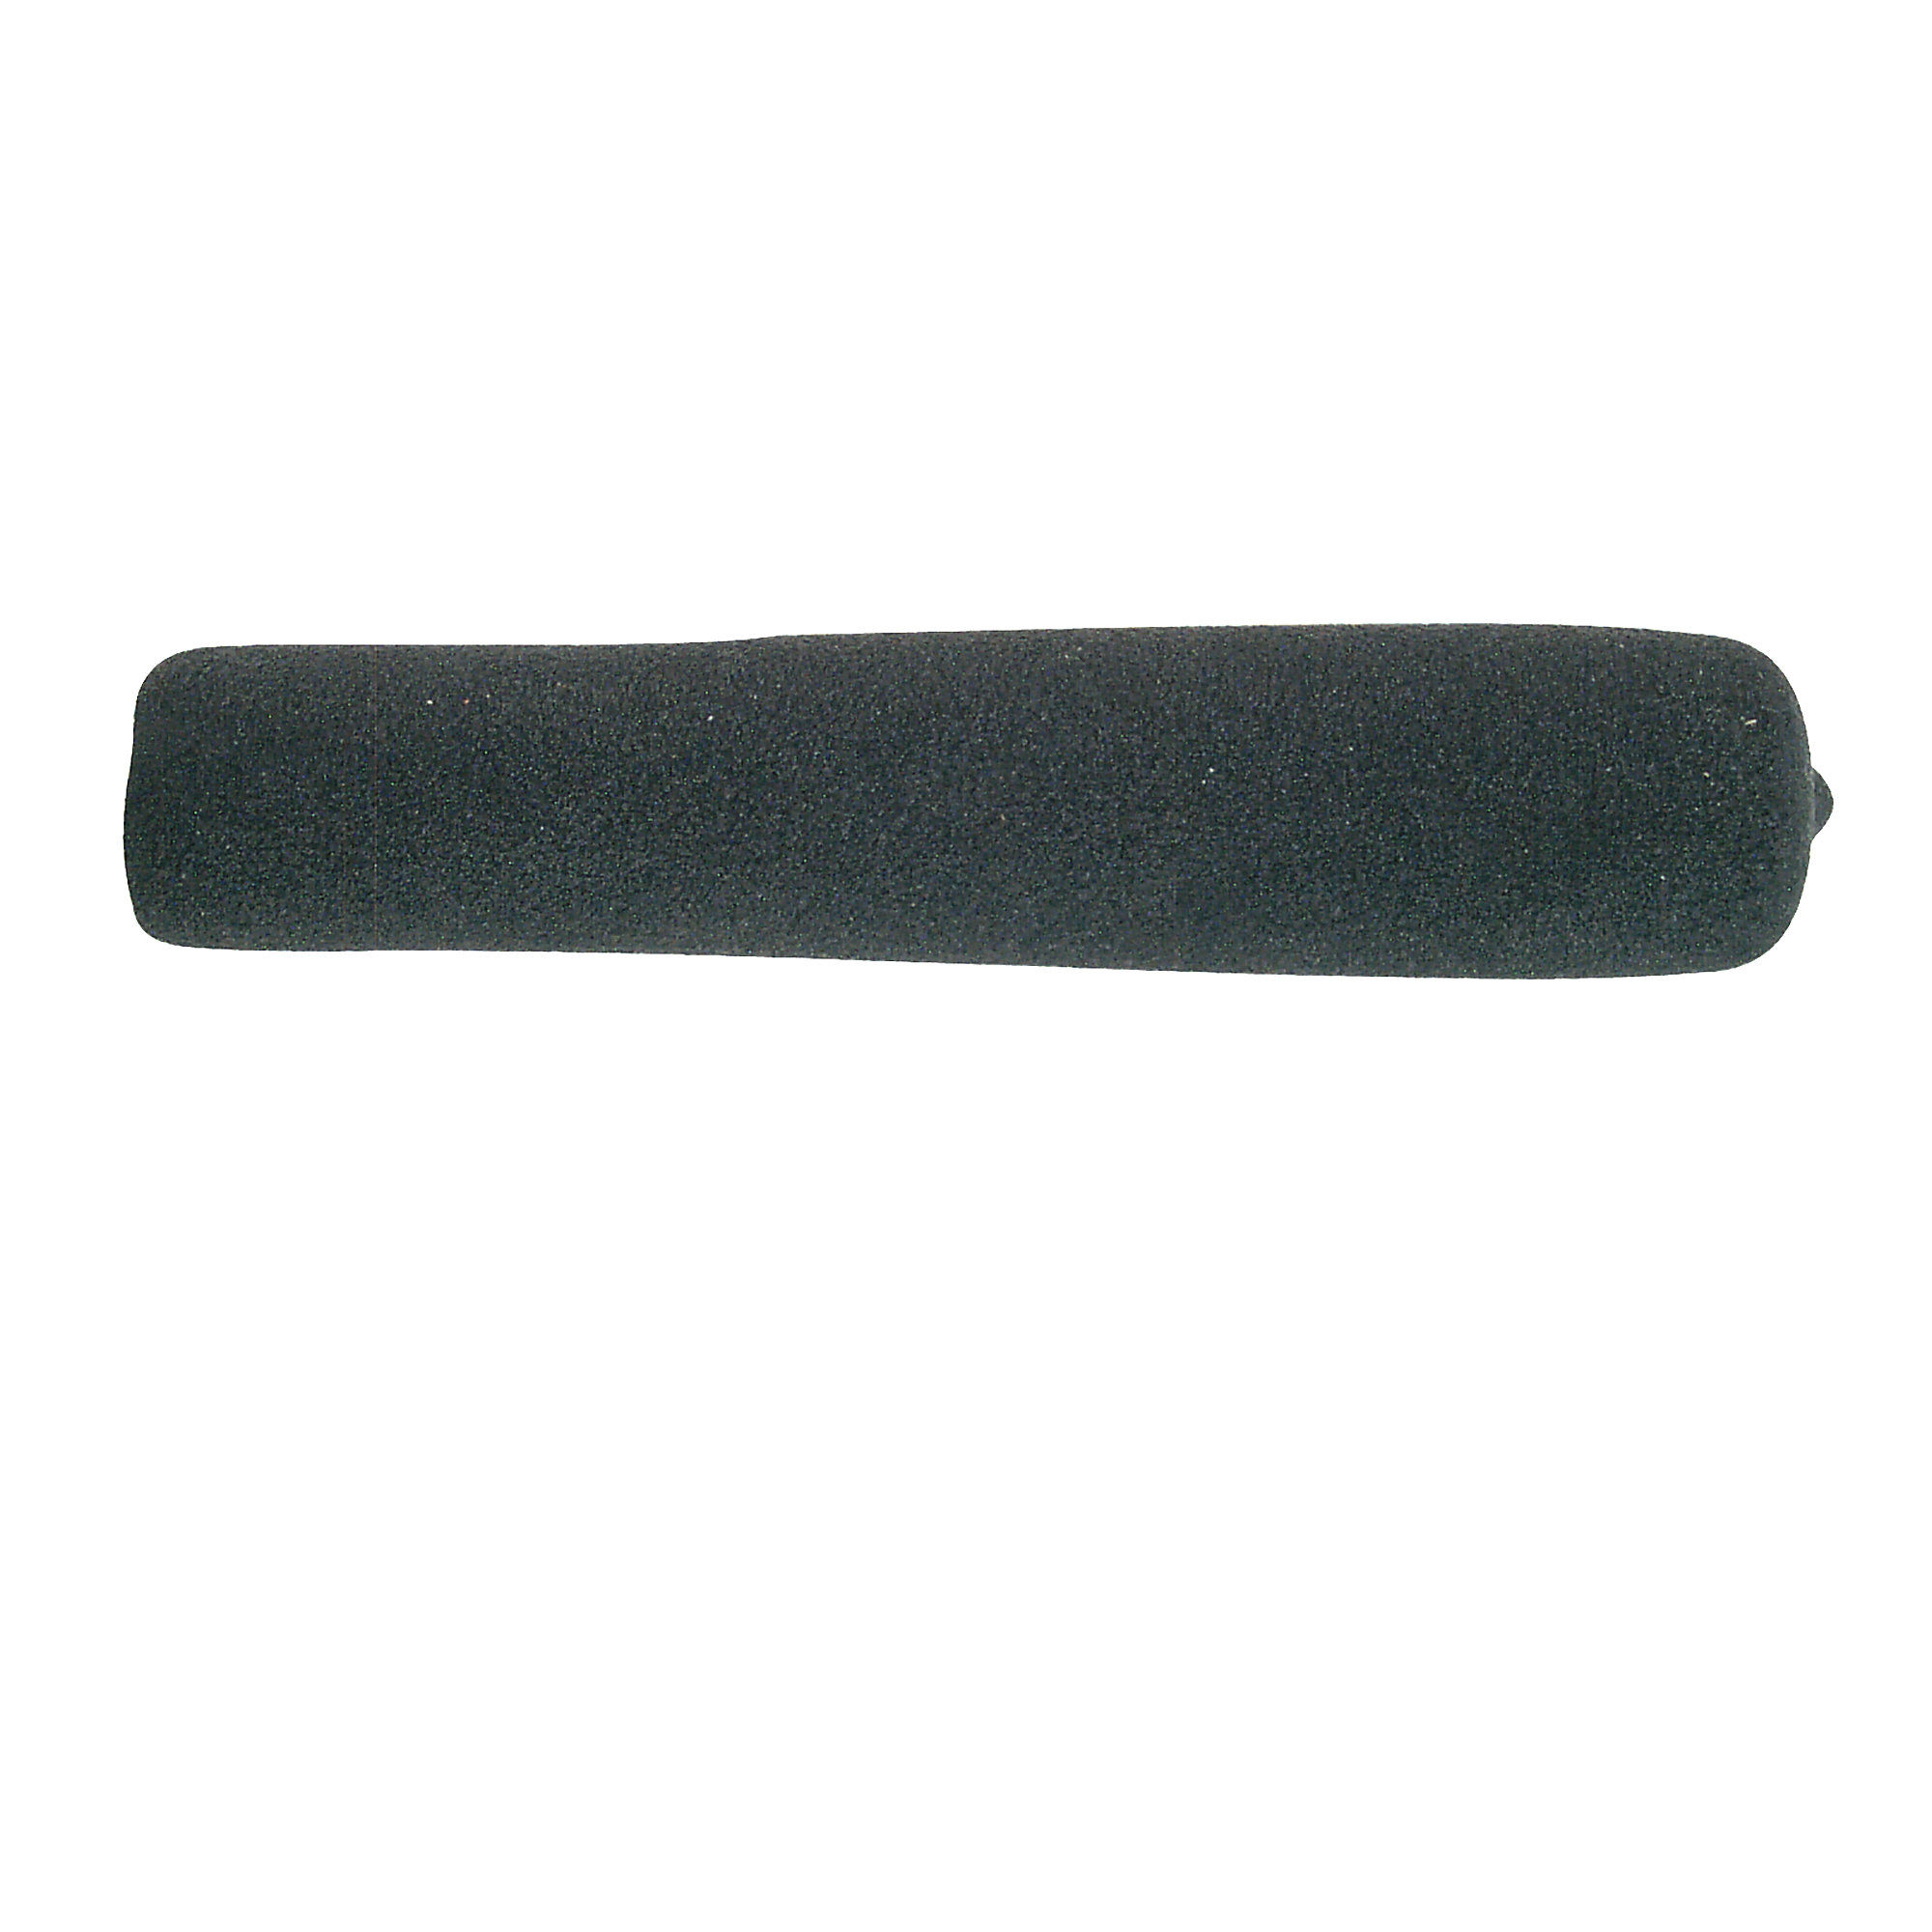 Closed End Rubber Grip, 6" Long, Fits 1", Each